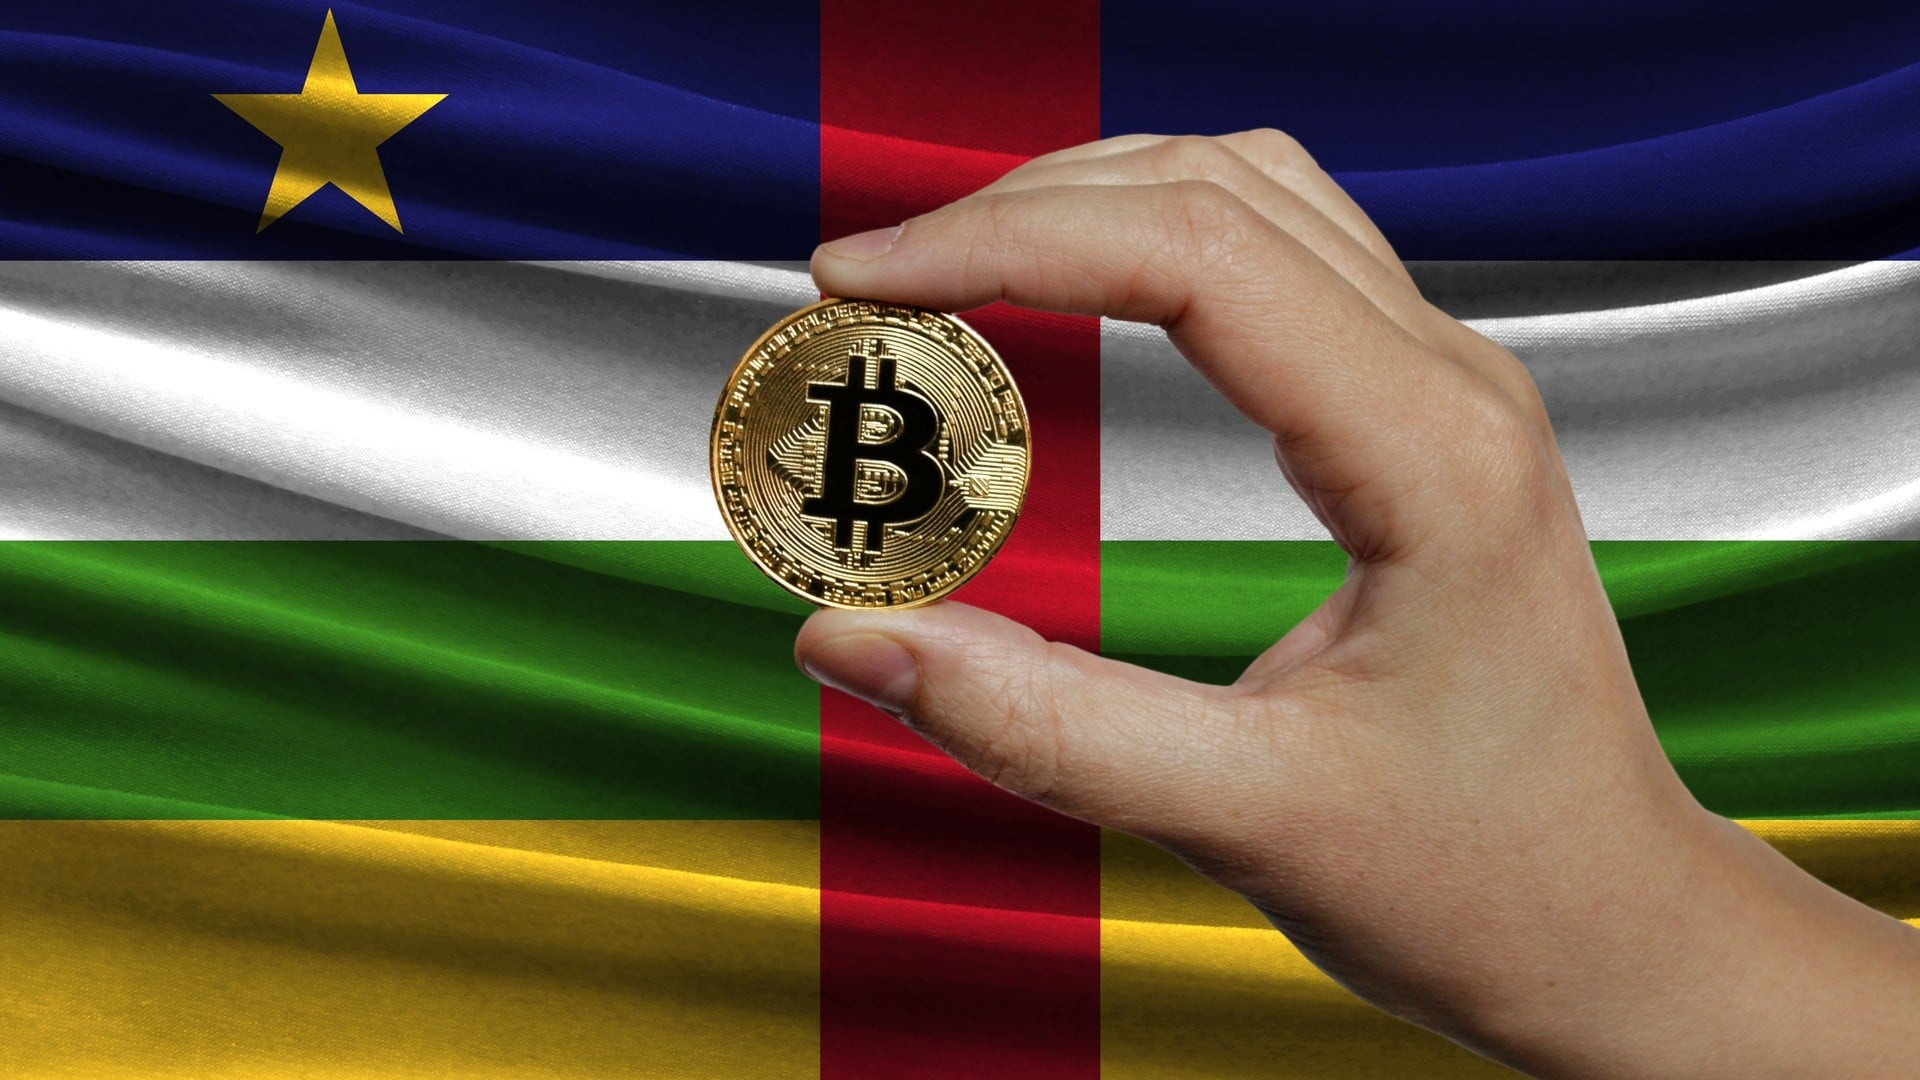 a poor country made bitcoin a national currency